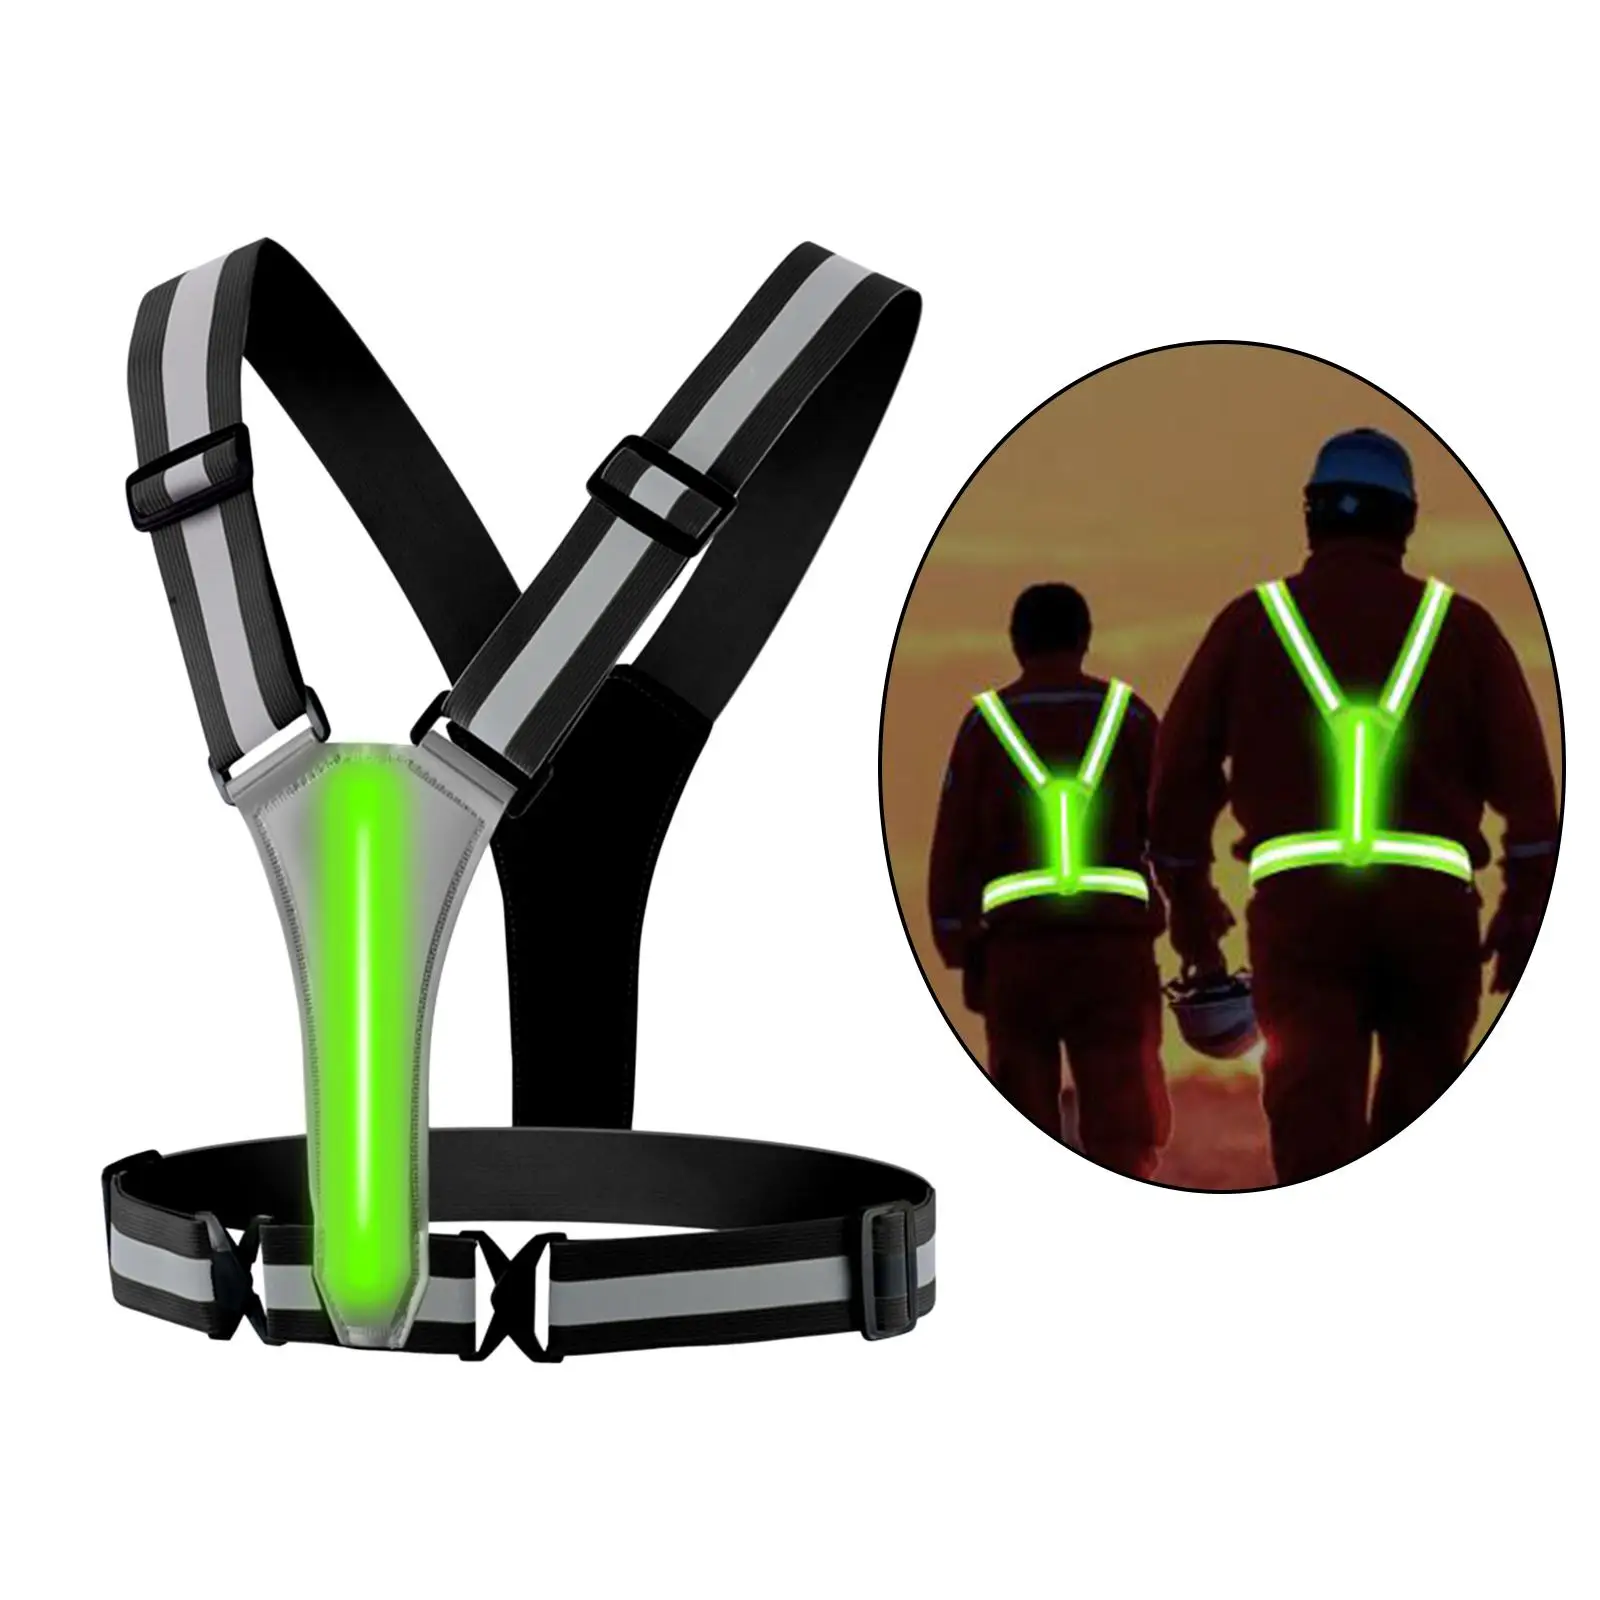 LED Reflective Vest Adjustable USB Rechargeable Glowing Reflector Straps for Night Walking Running Hiking Sports Men Women Kids